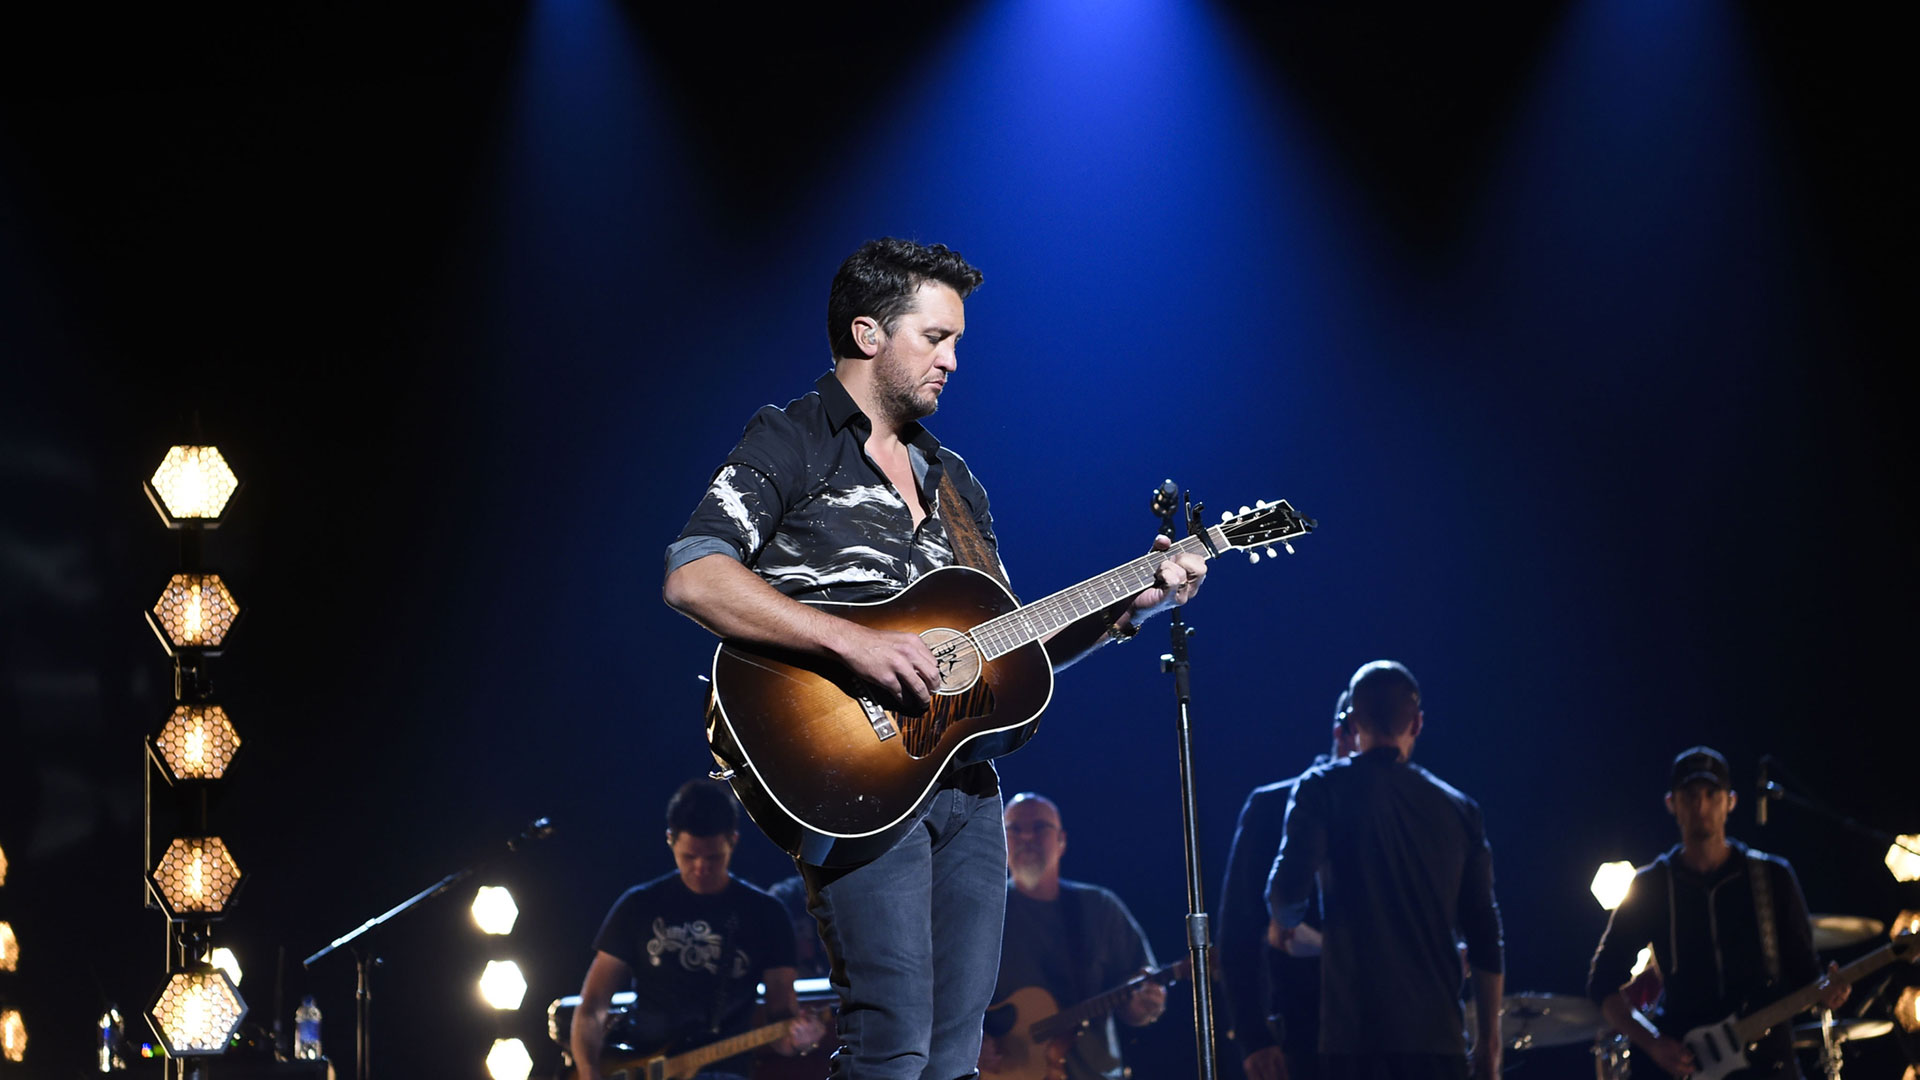 Luke Bryan jams out with his band during his rehearsal for the 53rd ACM Awards.